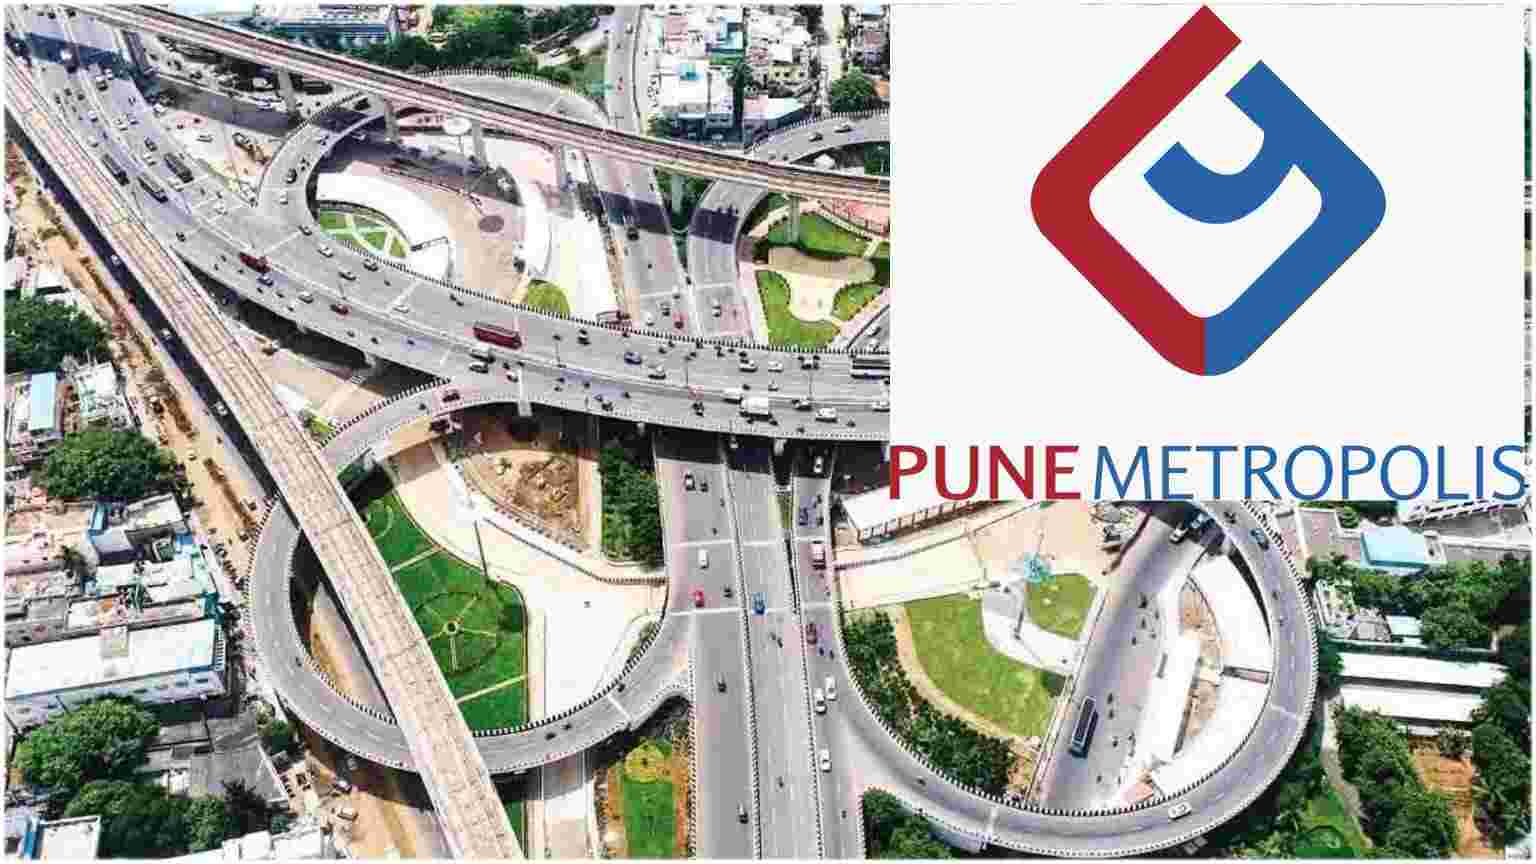 Land Acquisition for Pune Ring Road 80% Complete,